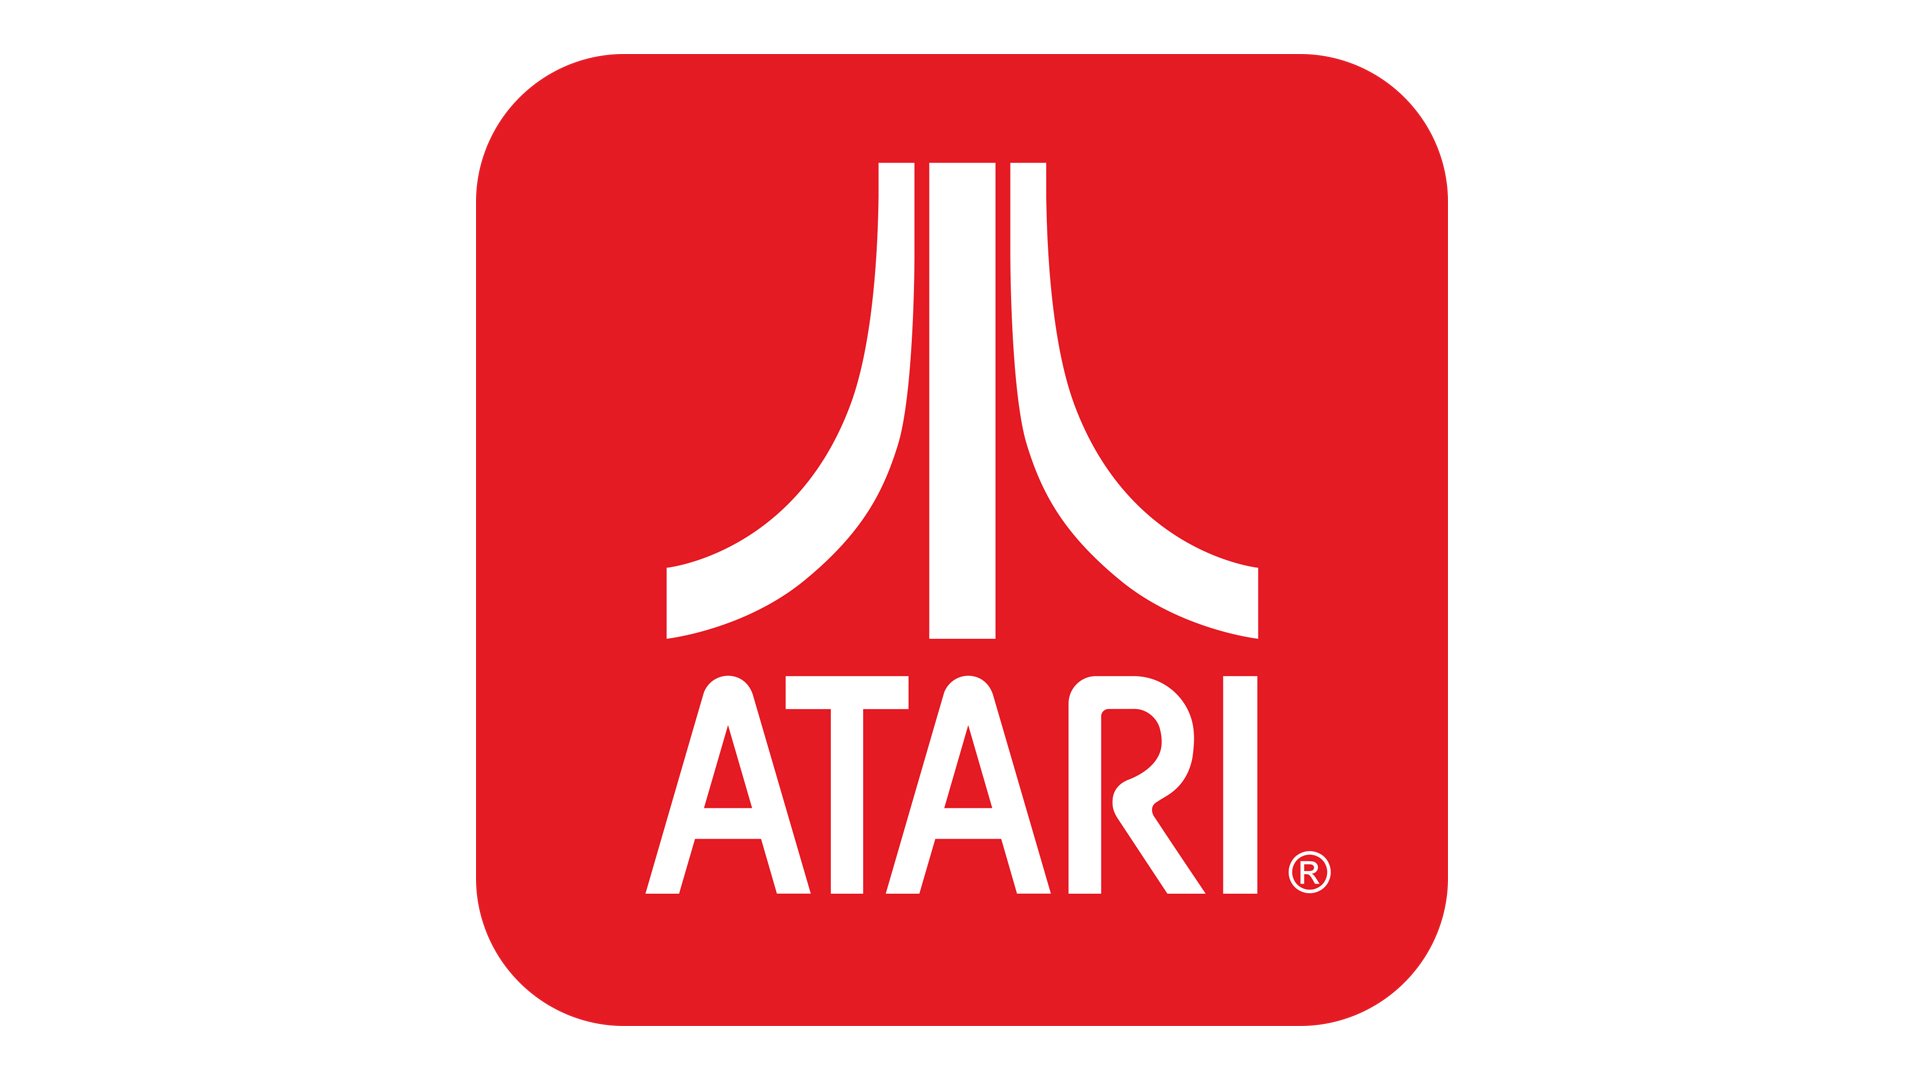 Atari Token Now Generally Available on Changelly to Make Premier Video Game Token More Accessible in the USA